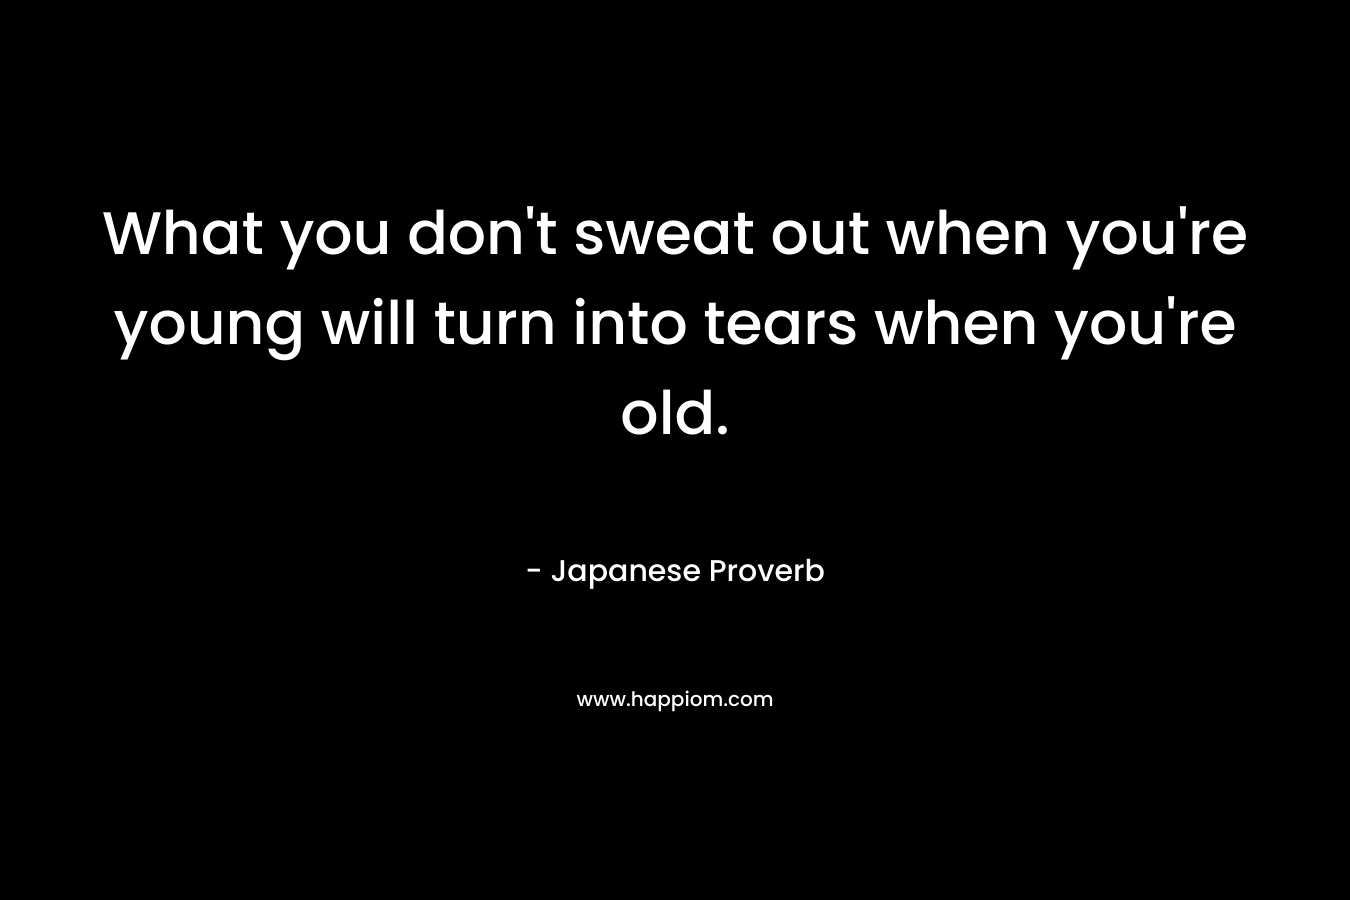 What you don’t sweat out when you’re young will turn into tears when you’re old. – Japanese Proverb